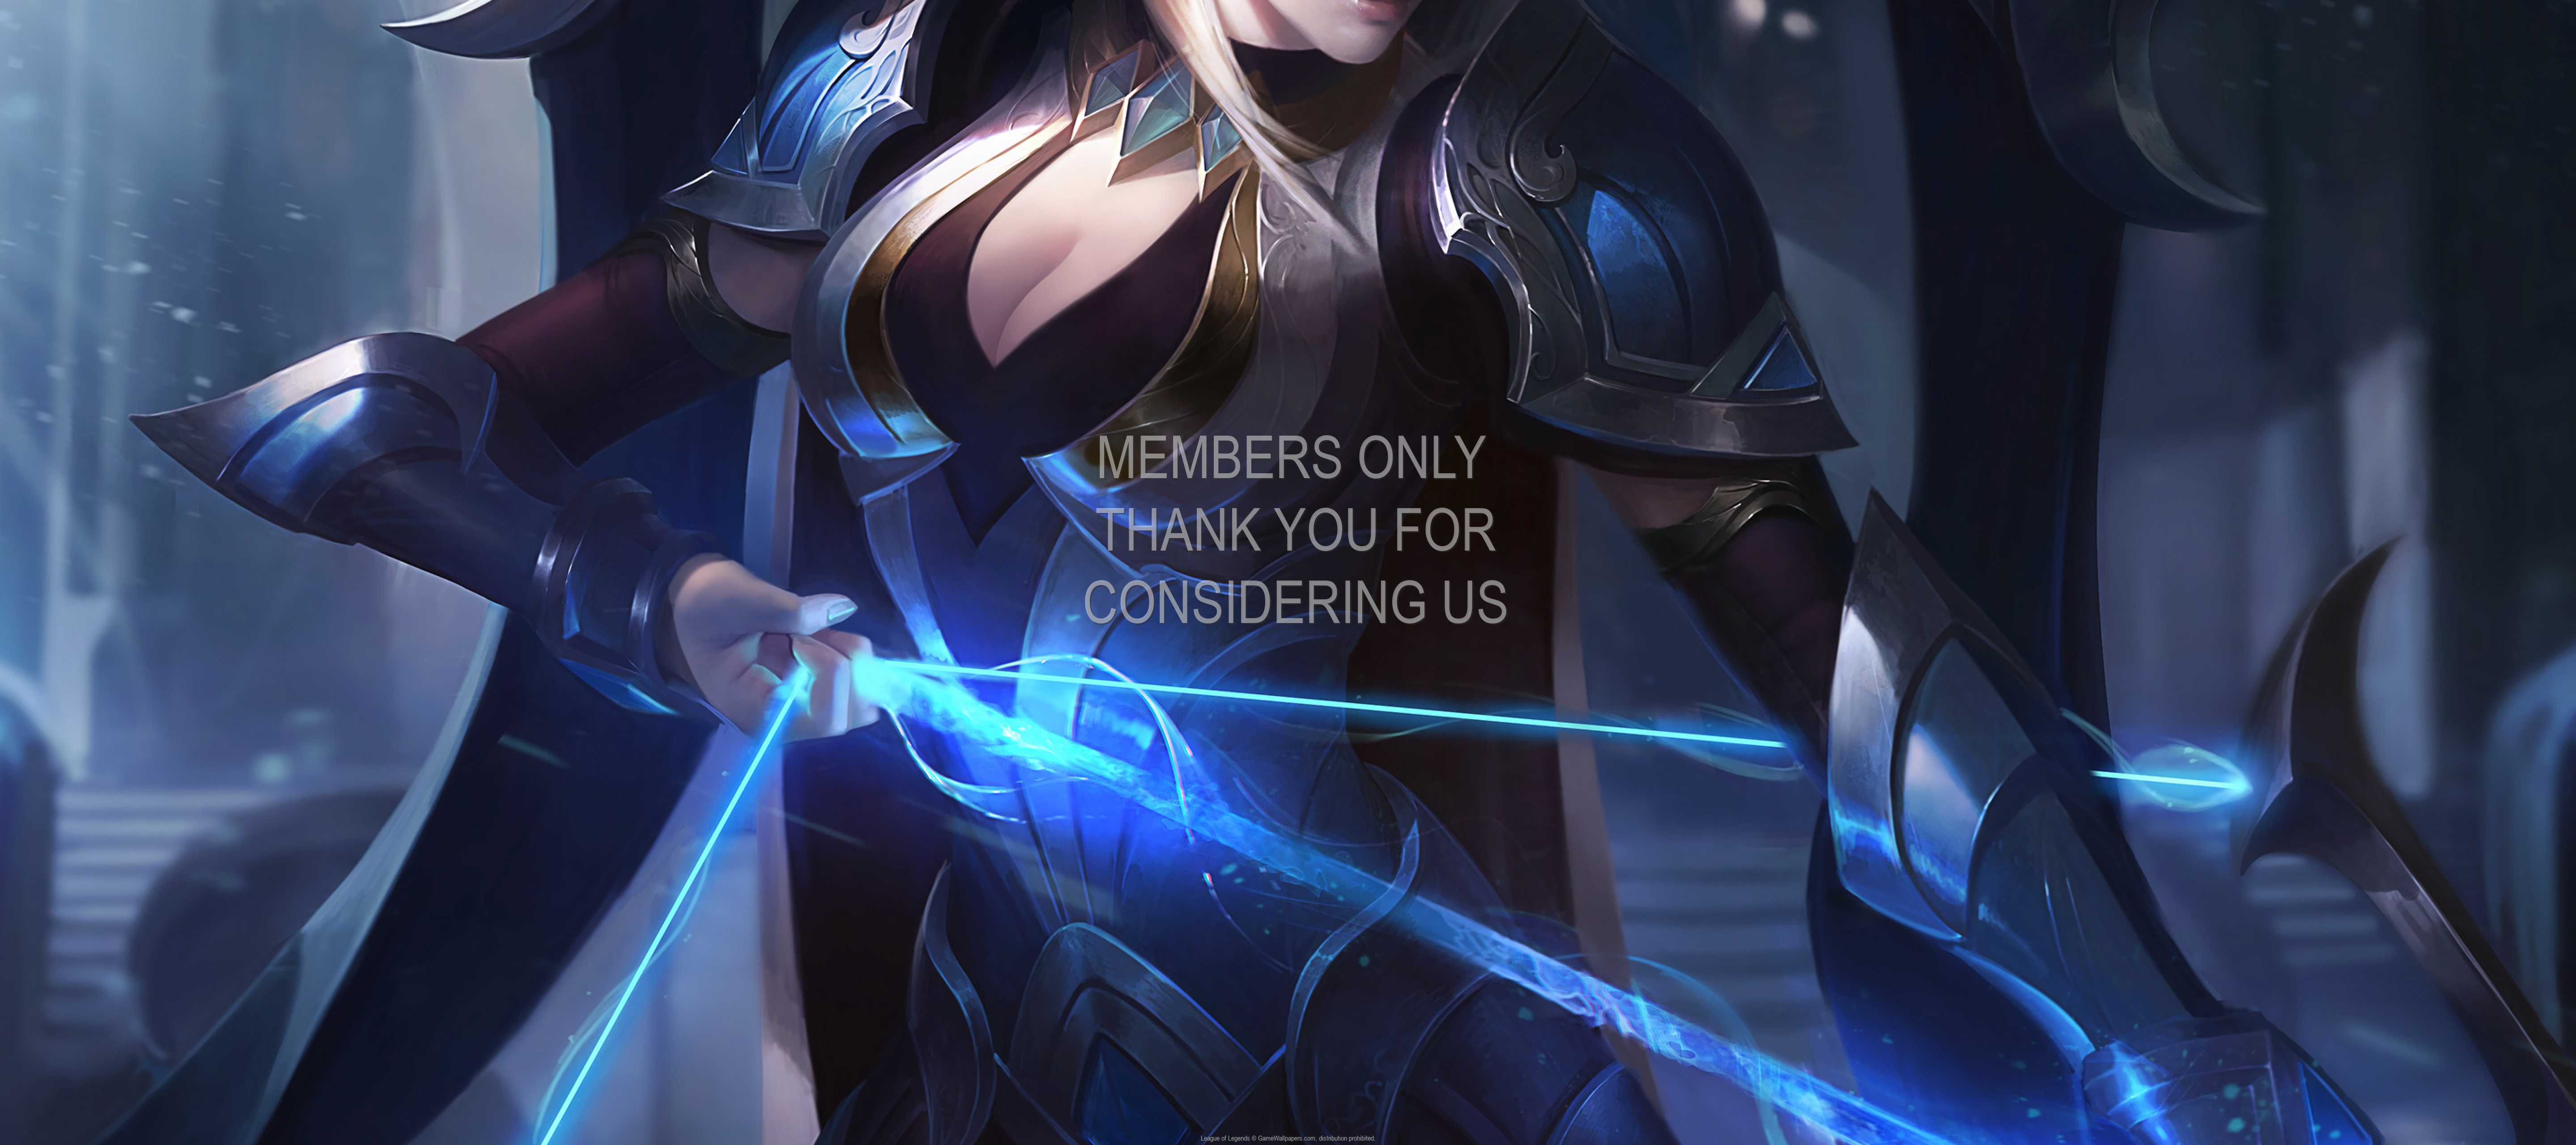 League of Legends 1440p%20Horizontal Mobile wallpaper or background 84